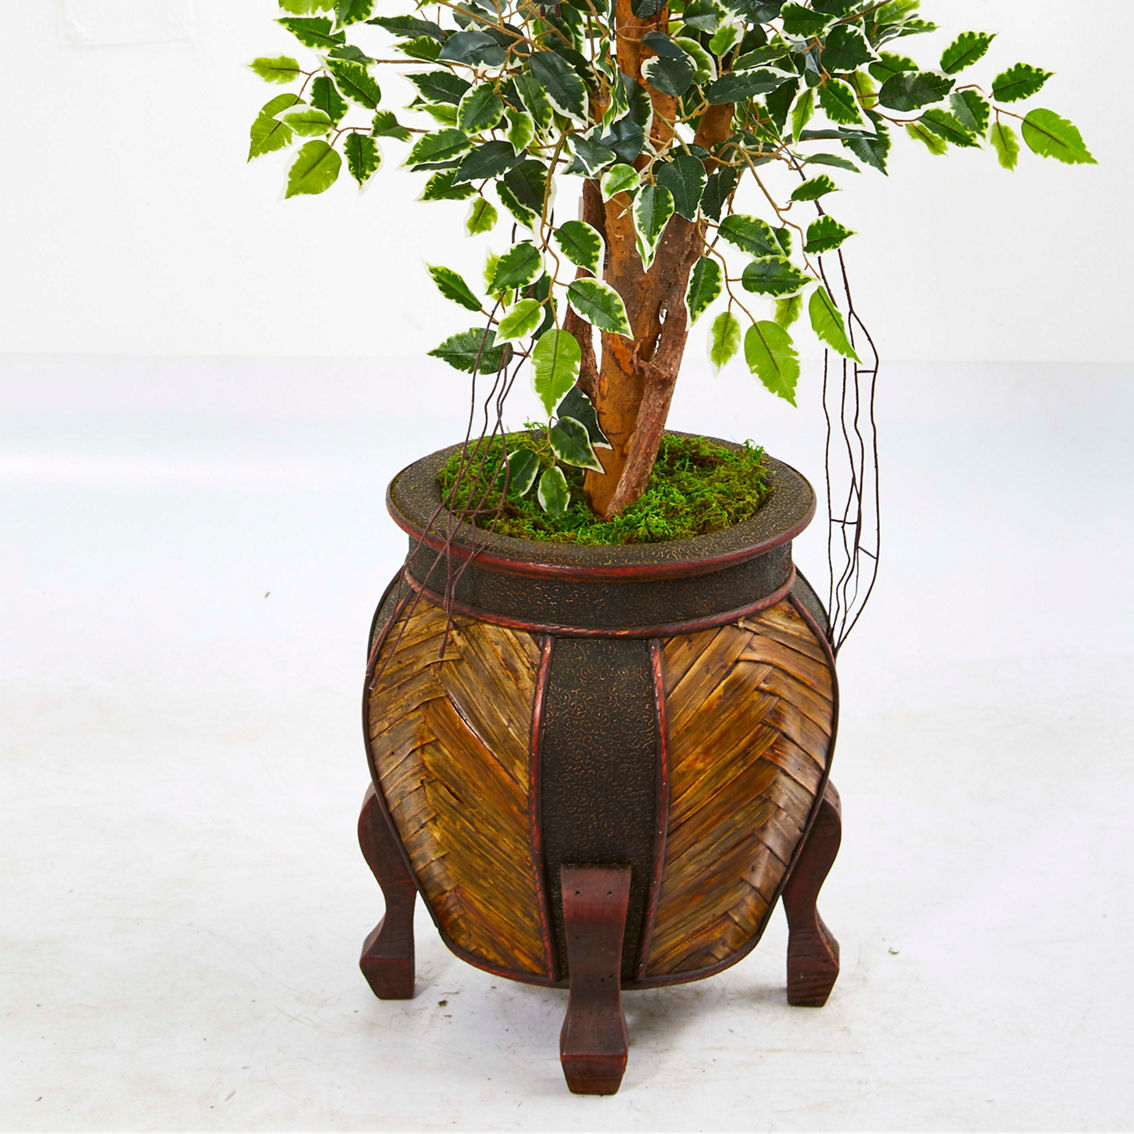 Nearly Natural 59-in Variegated Ficus Artificial Tree in Decorative Planter - Image 2 of 2